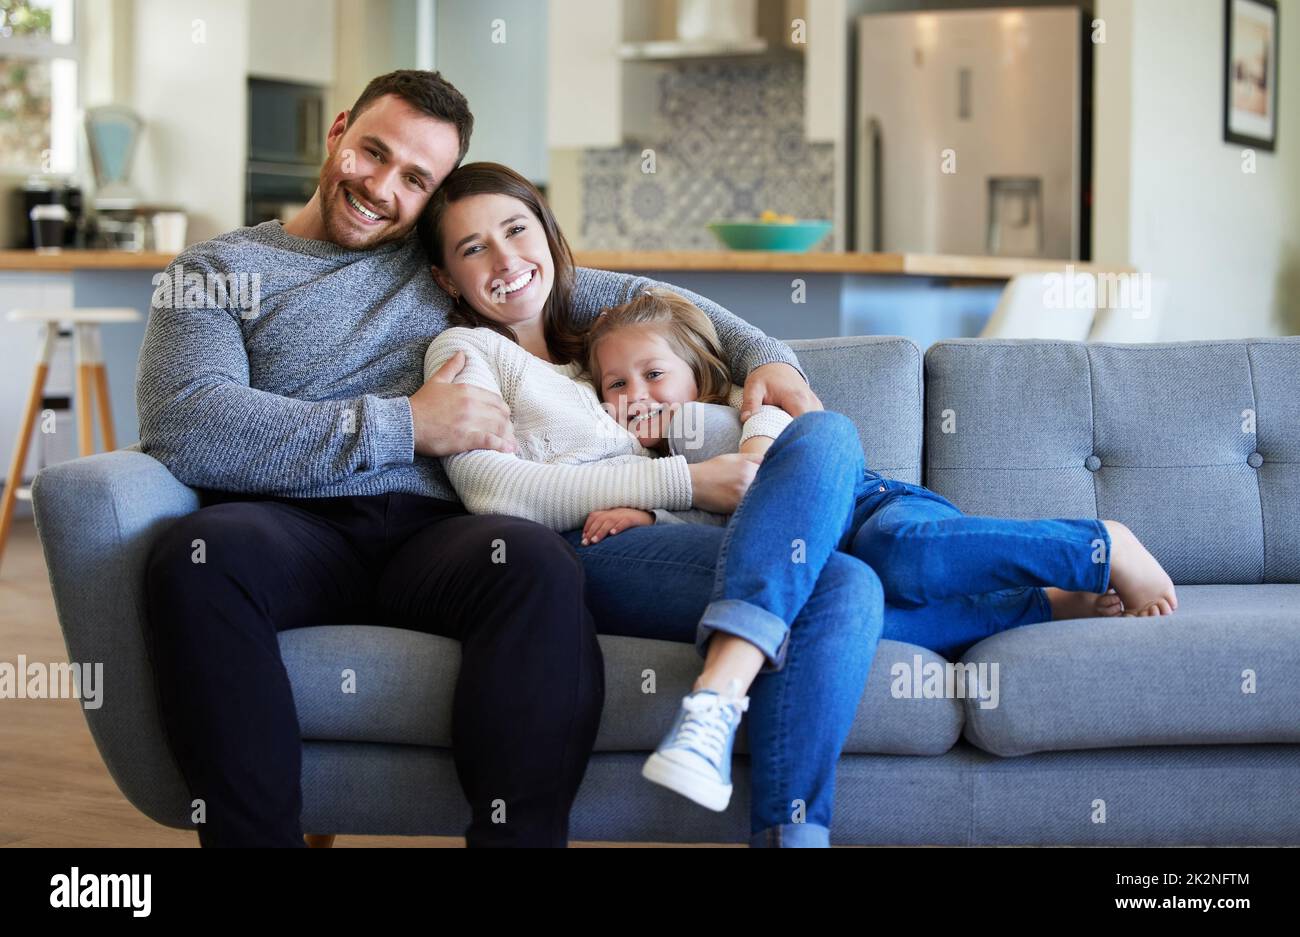 They are my source of comfort. Shot of a young family relaxing on the couch at home. Stock Photo